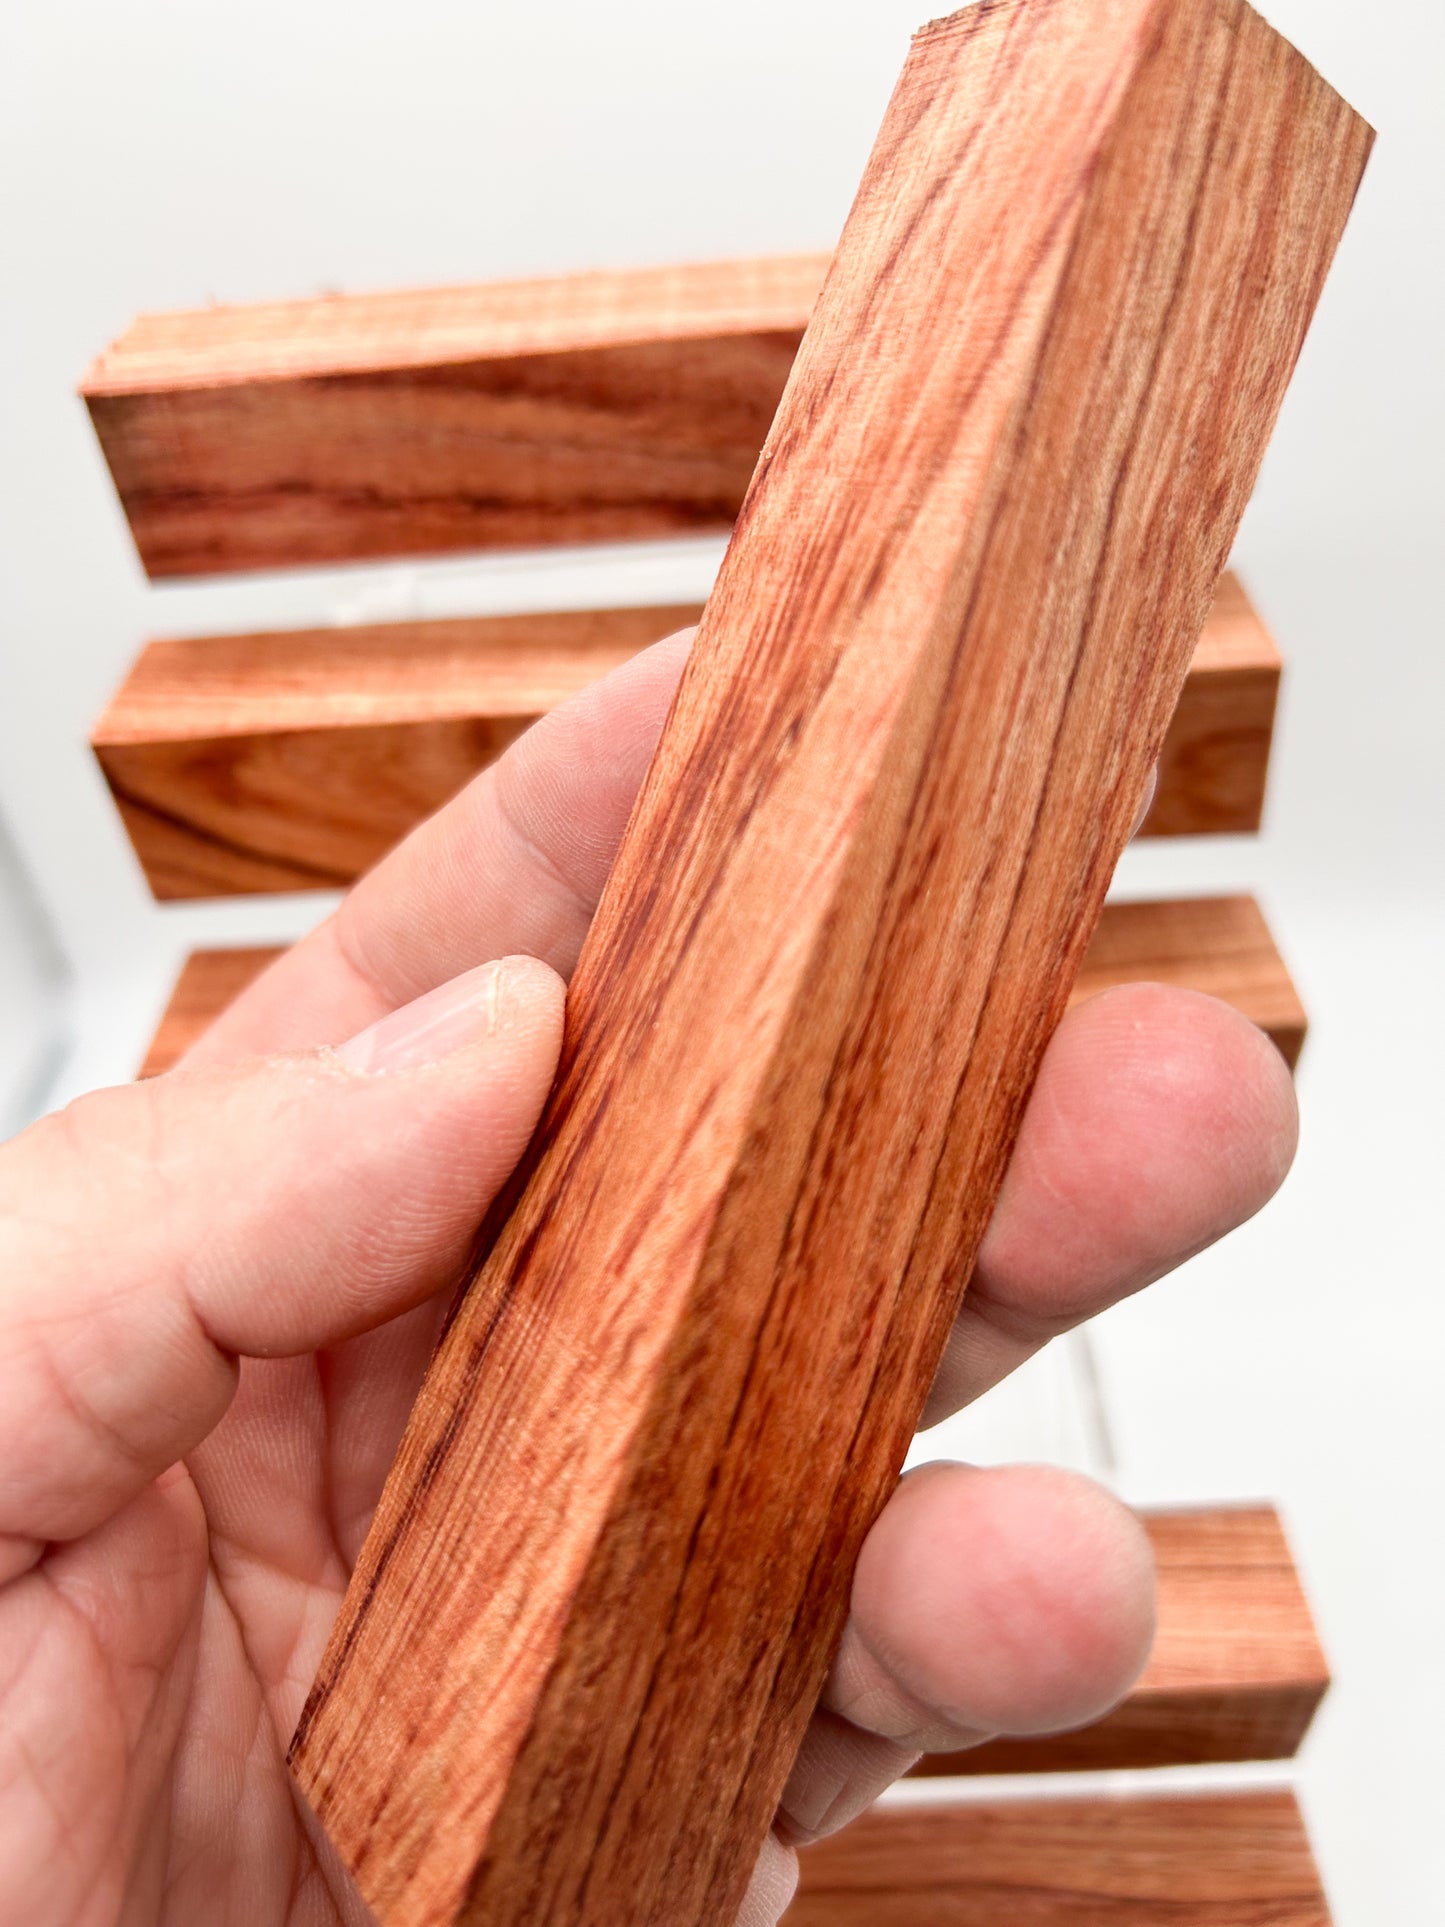 Rosewood Wood | Namibian | Wooden Pen Blanks | Highly Figured